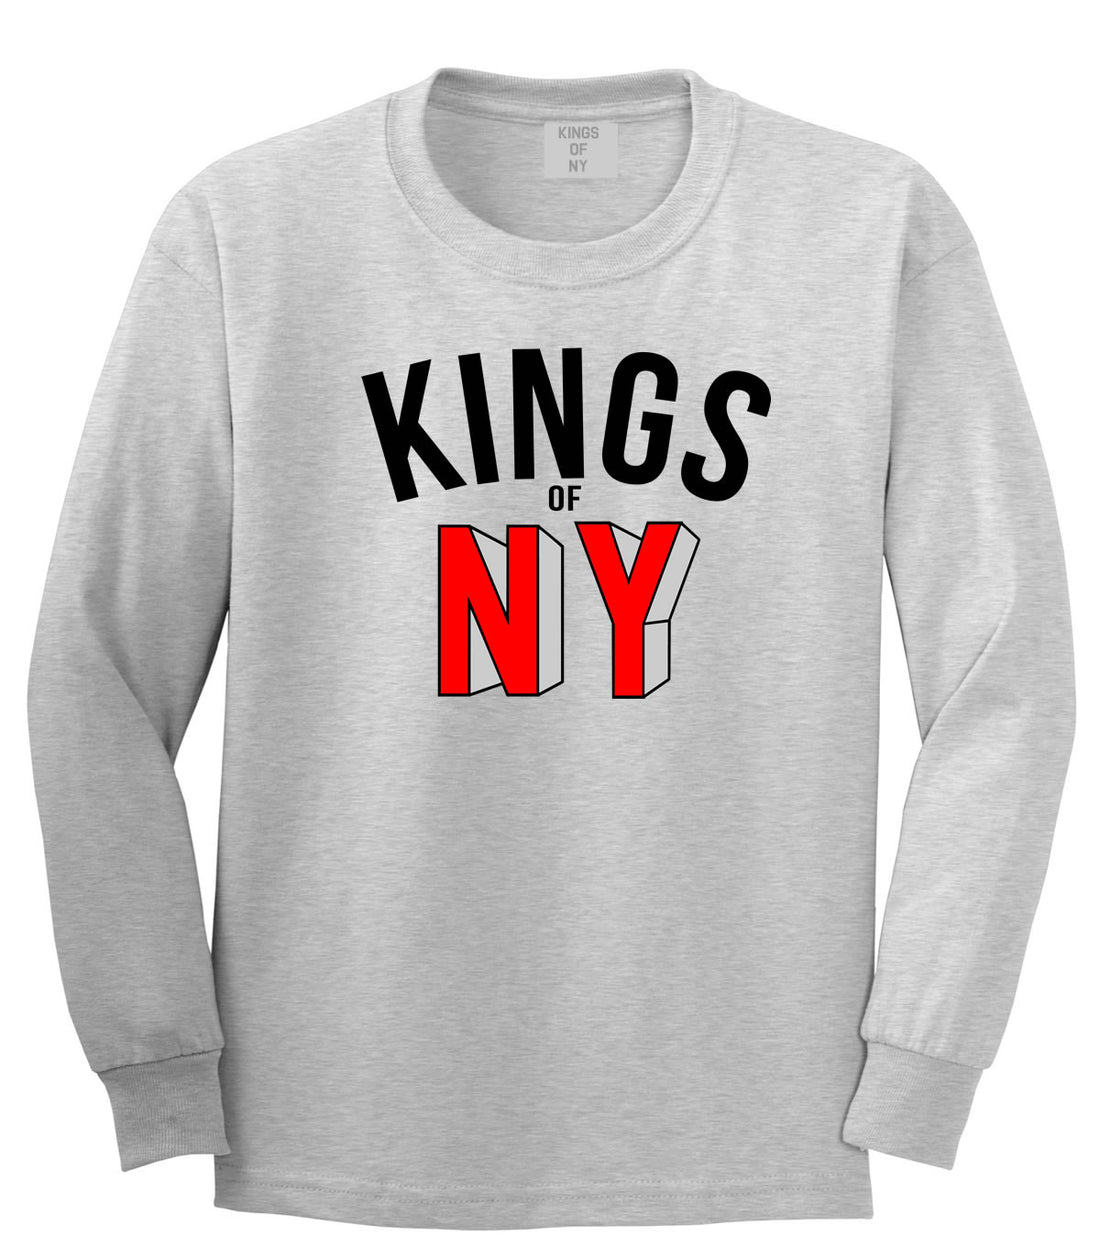 NY Red Block Letter Printed Boys Kids Long Sleeve T-Shirt in Grey by Kings Of NY